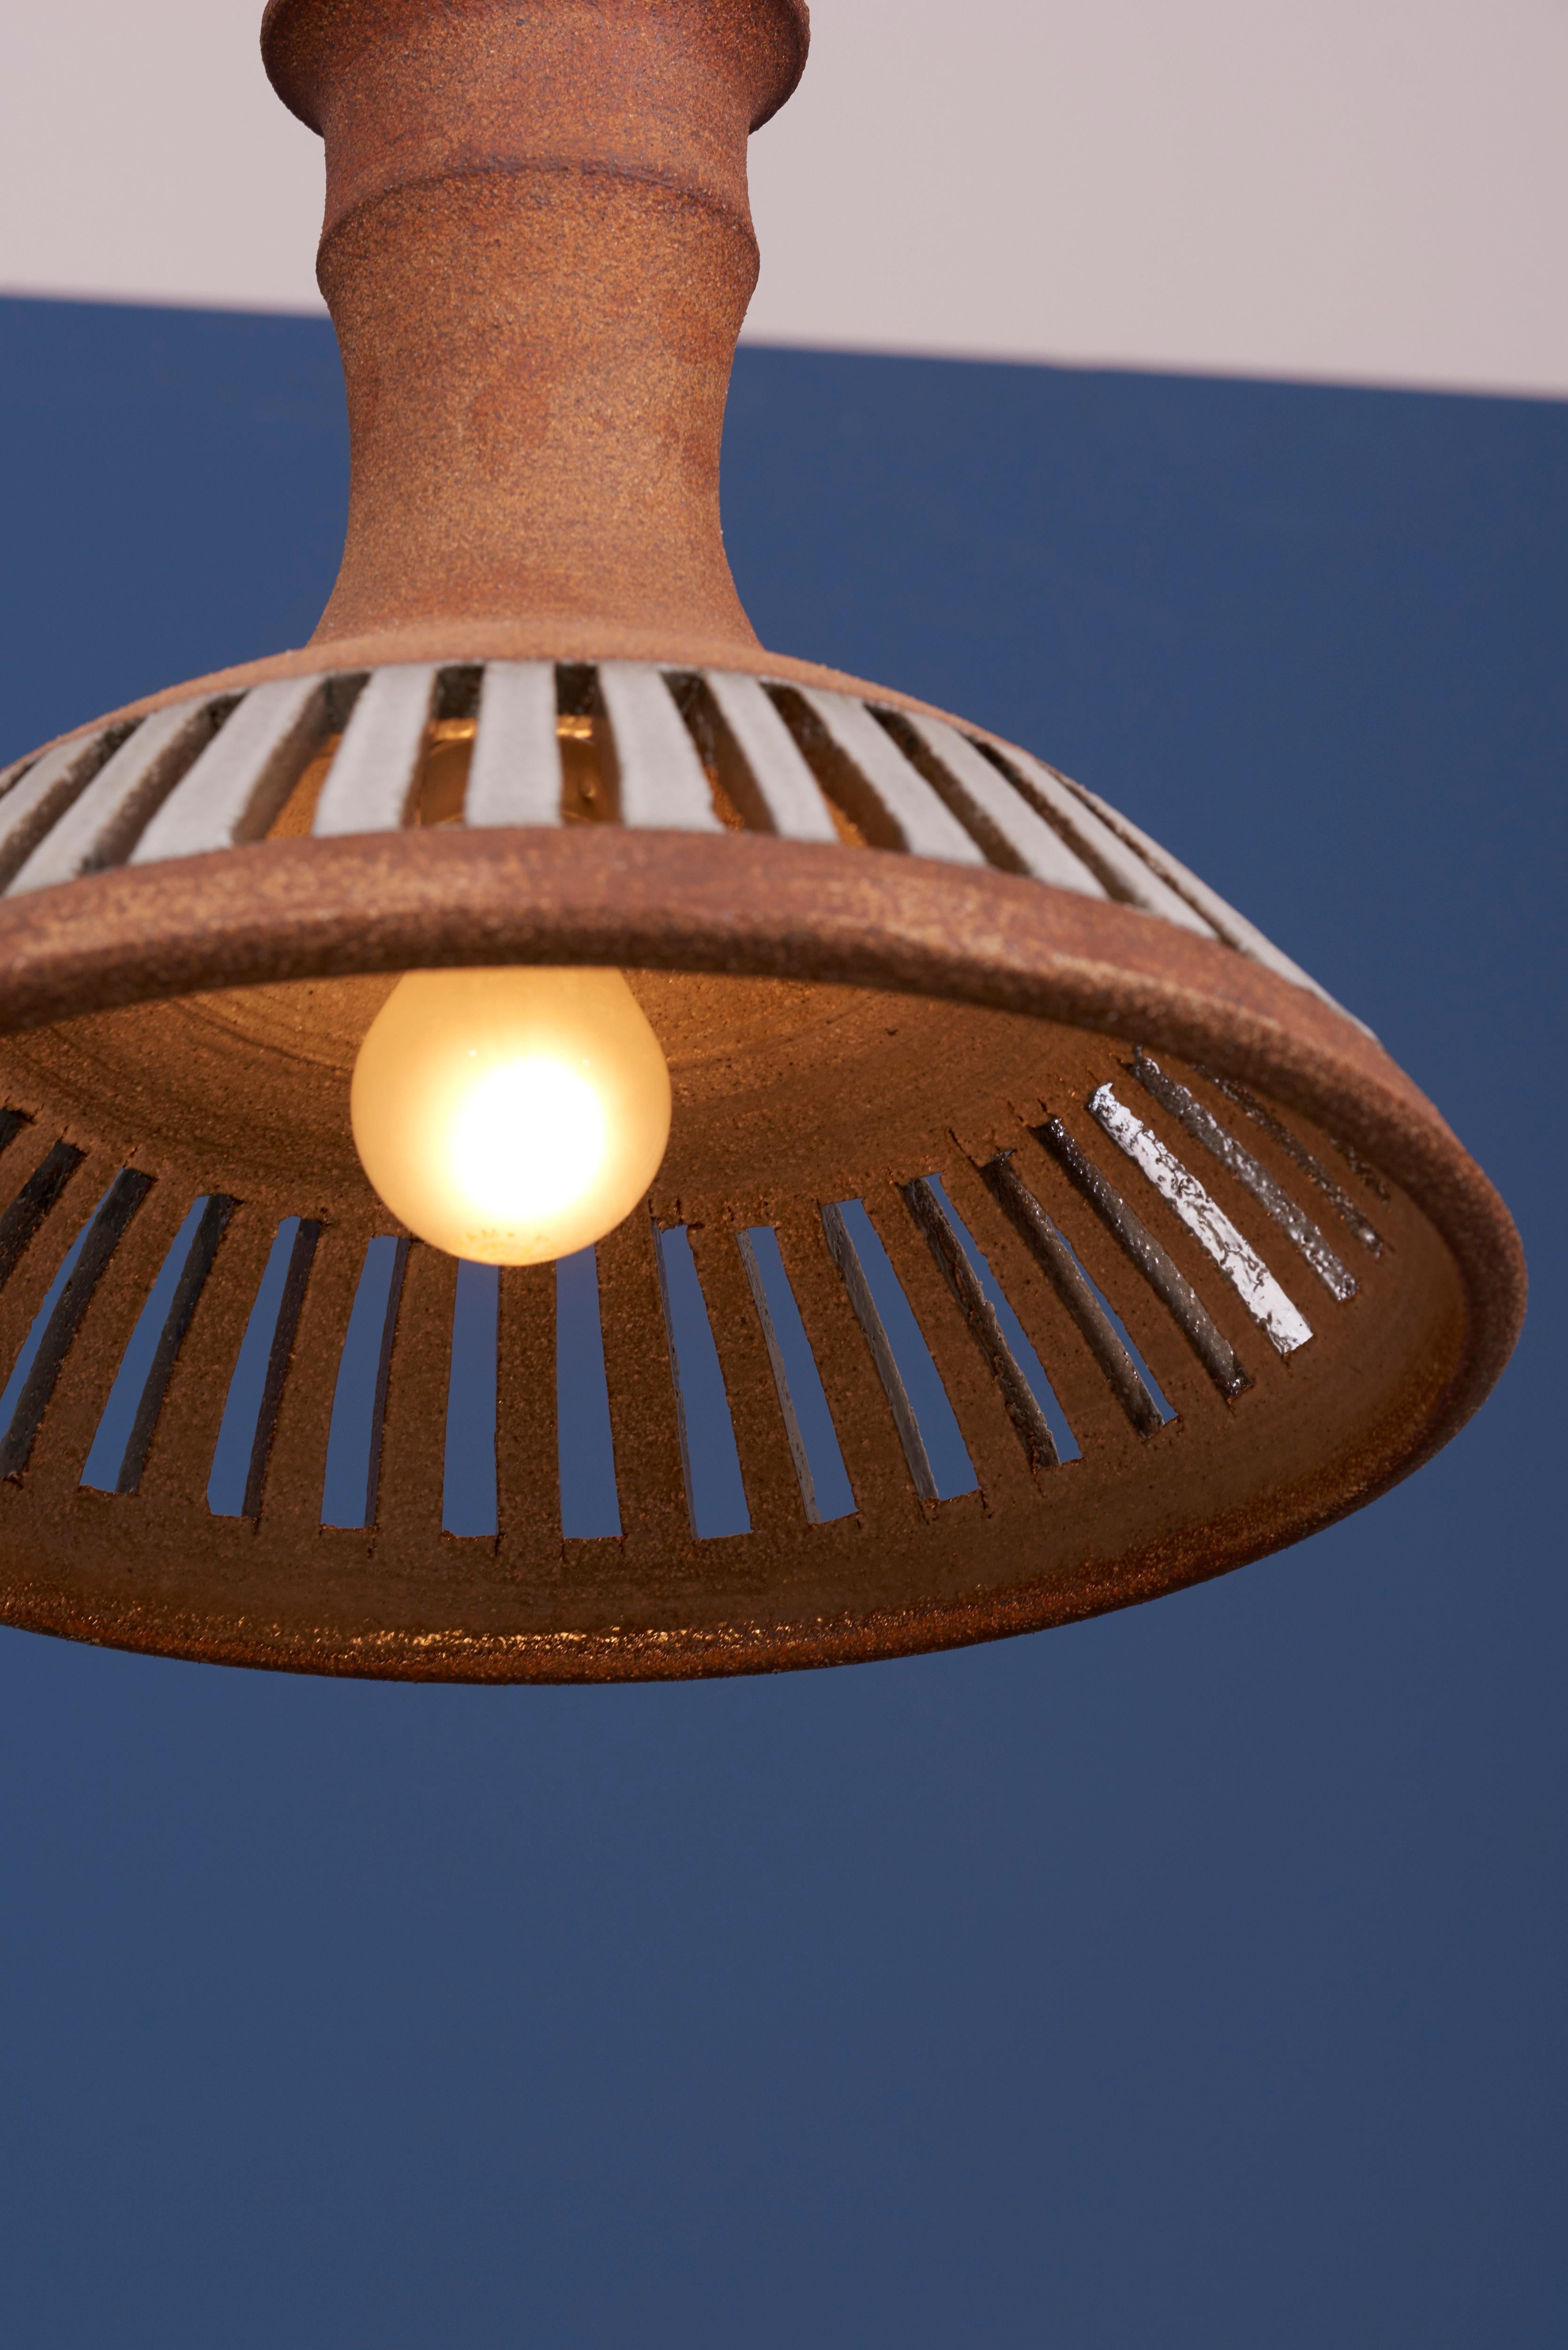 20th Century Clay Outdoor Hanging Light HL 10 by Brent J. Bennett, US, 2019